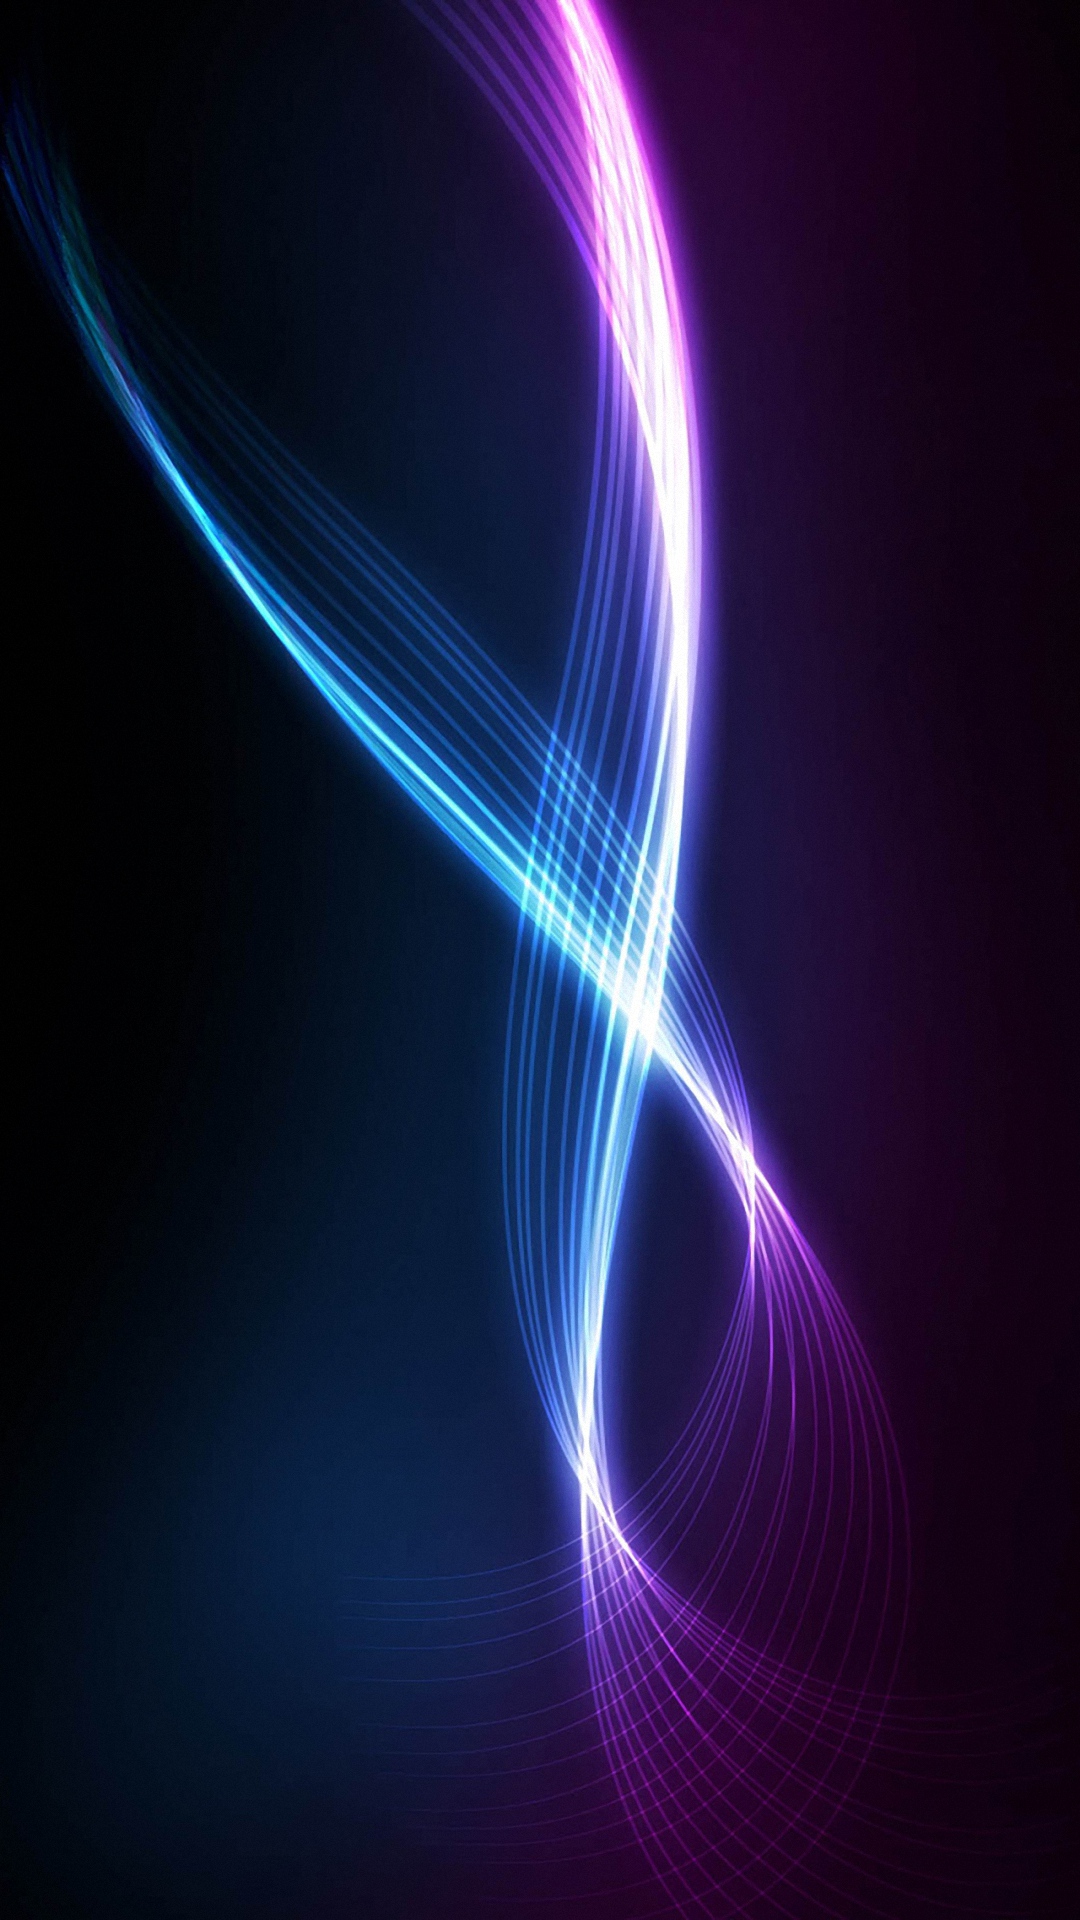 download blue violet stream beam wallpaper for samsung galaxy s4 s5 1080x1920